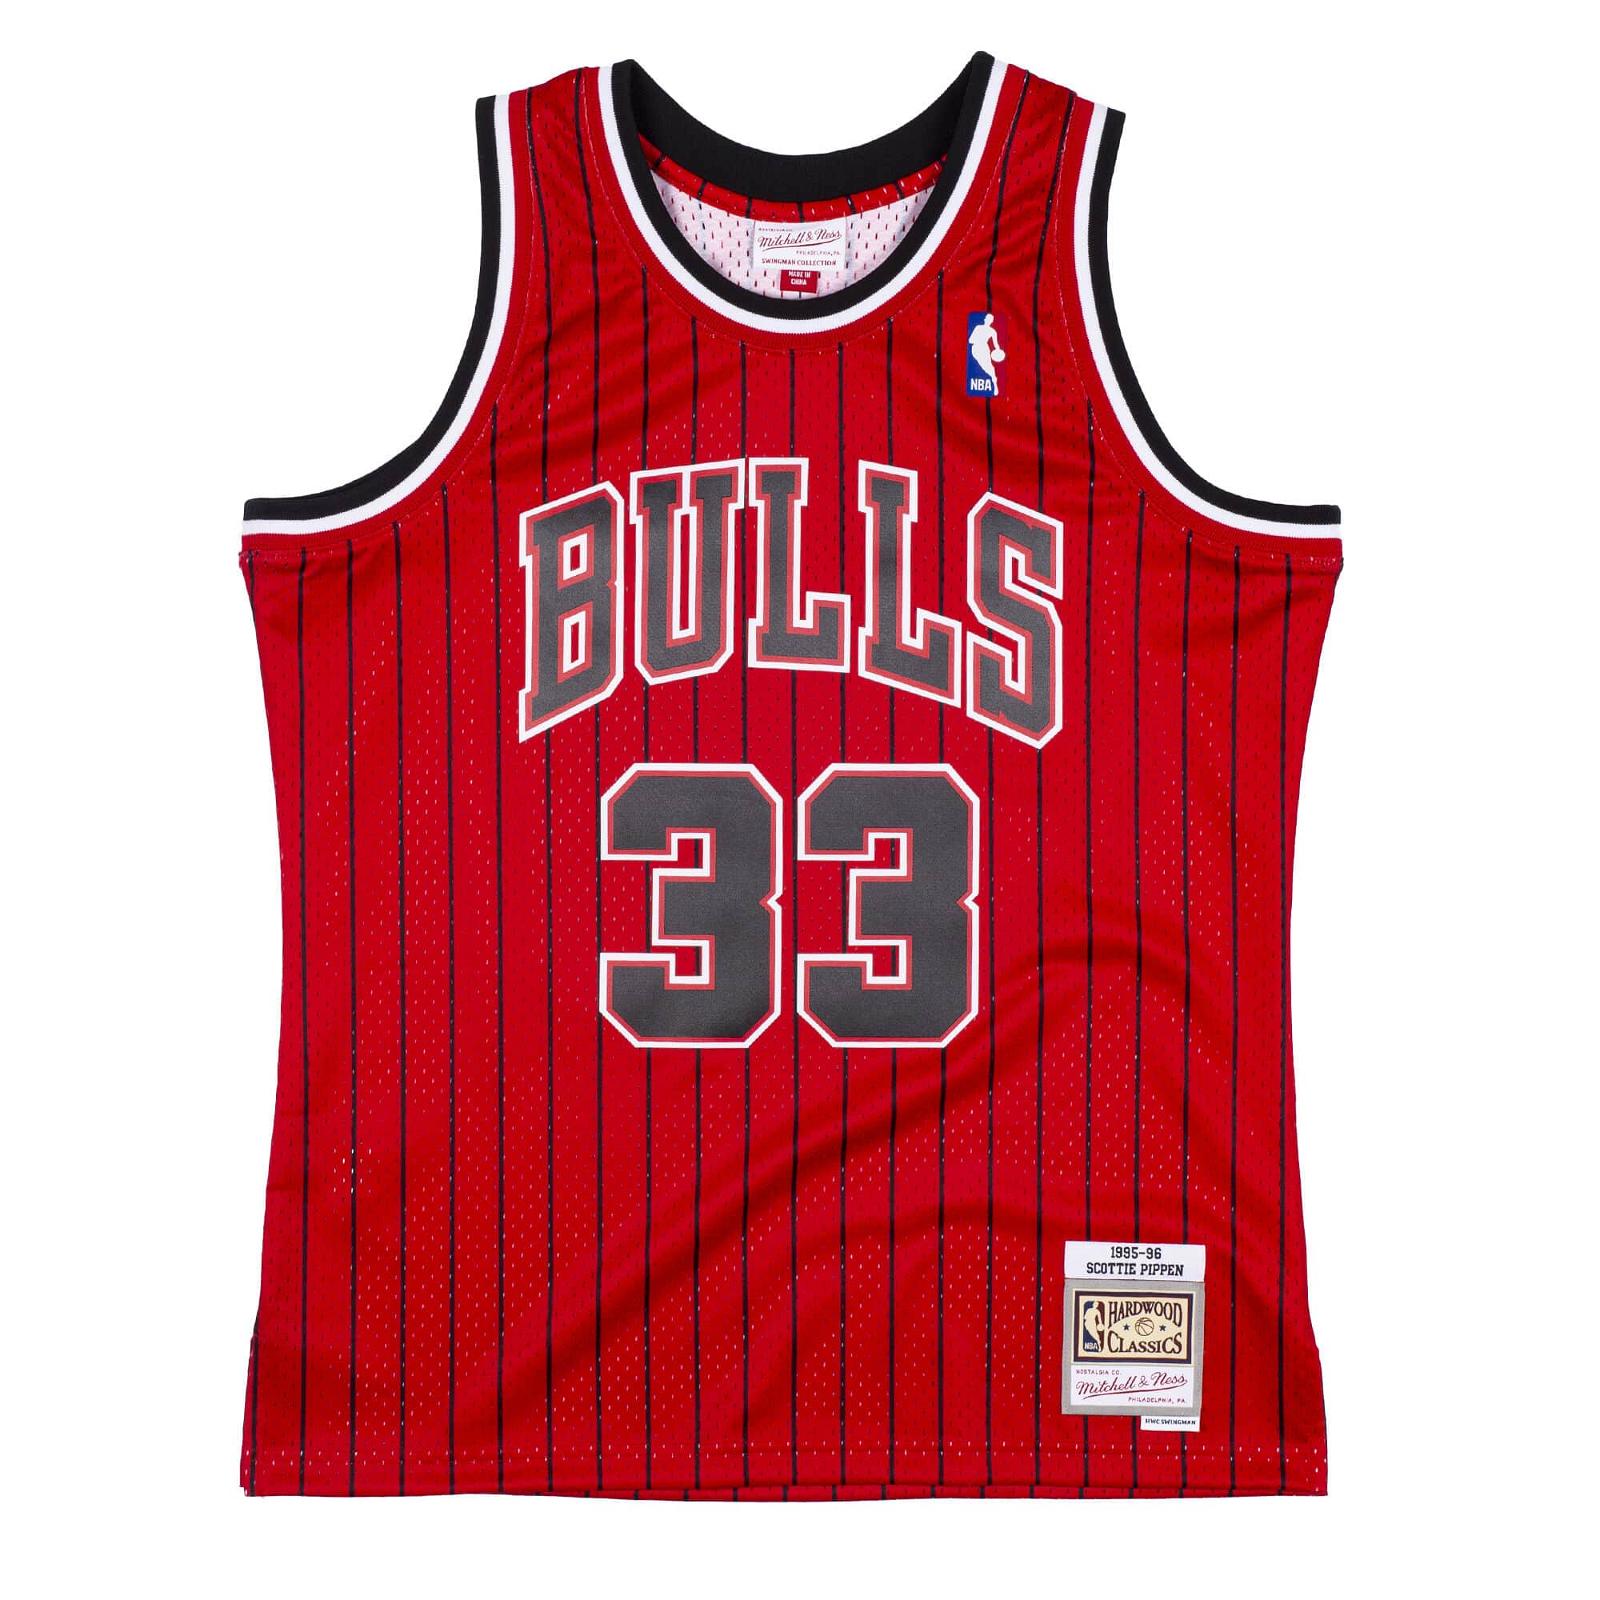 NBA Jersey Picks to Celebrate New Season from SNIPES